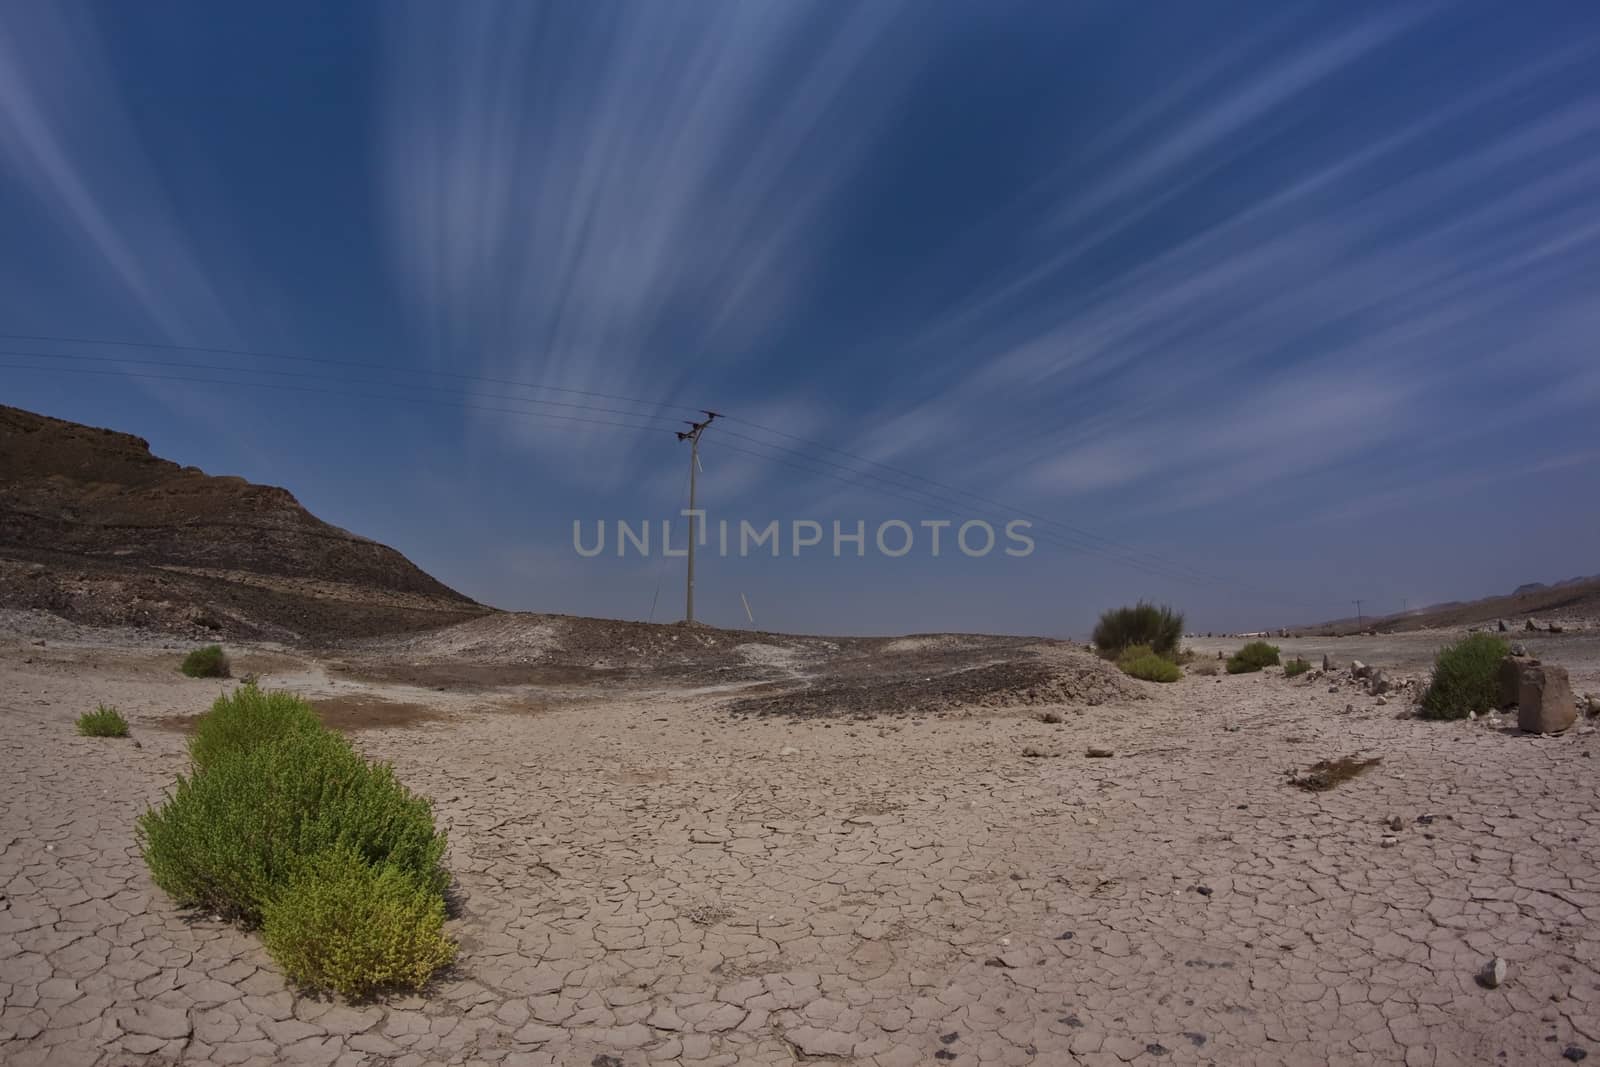 elecricity pole in the desert with blue cloudy sky and cracked land